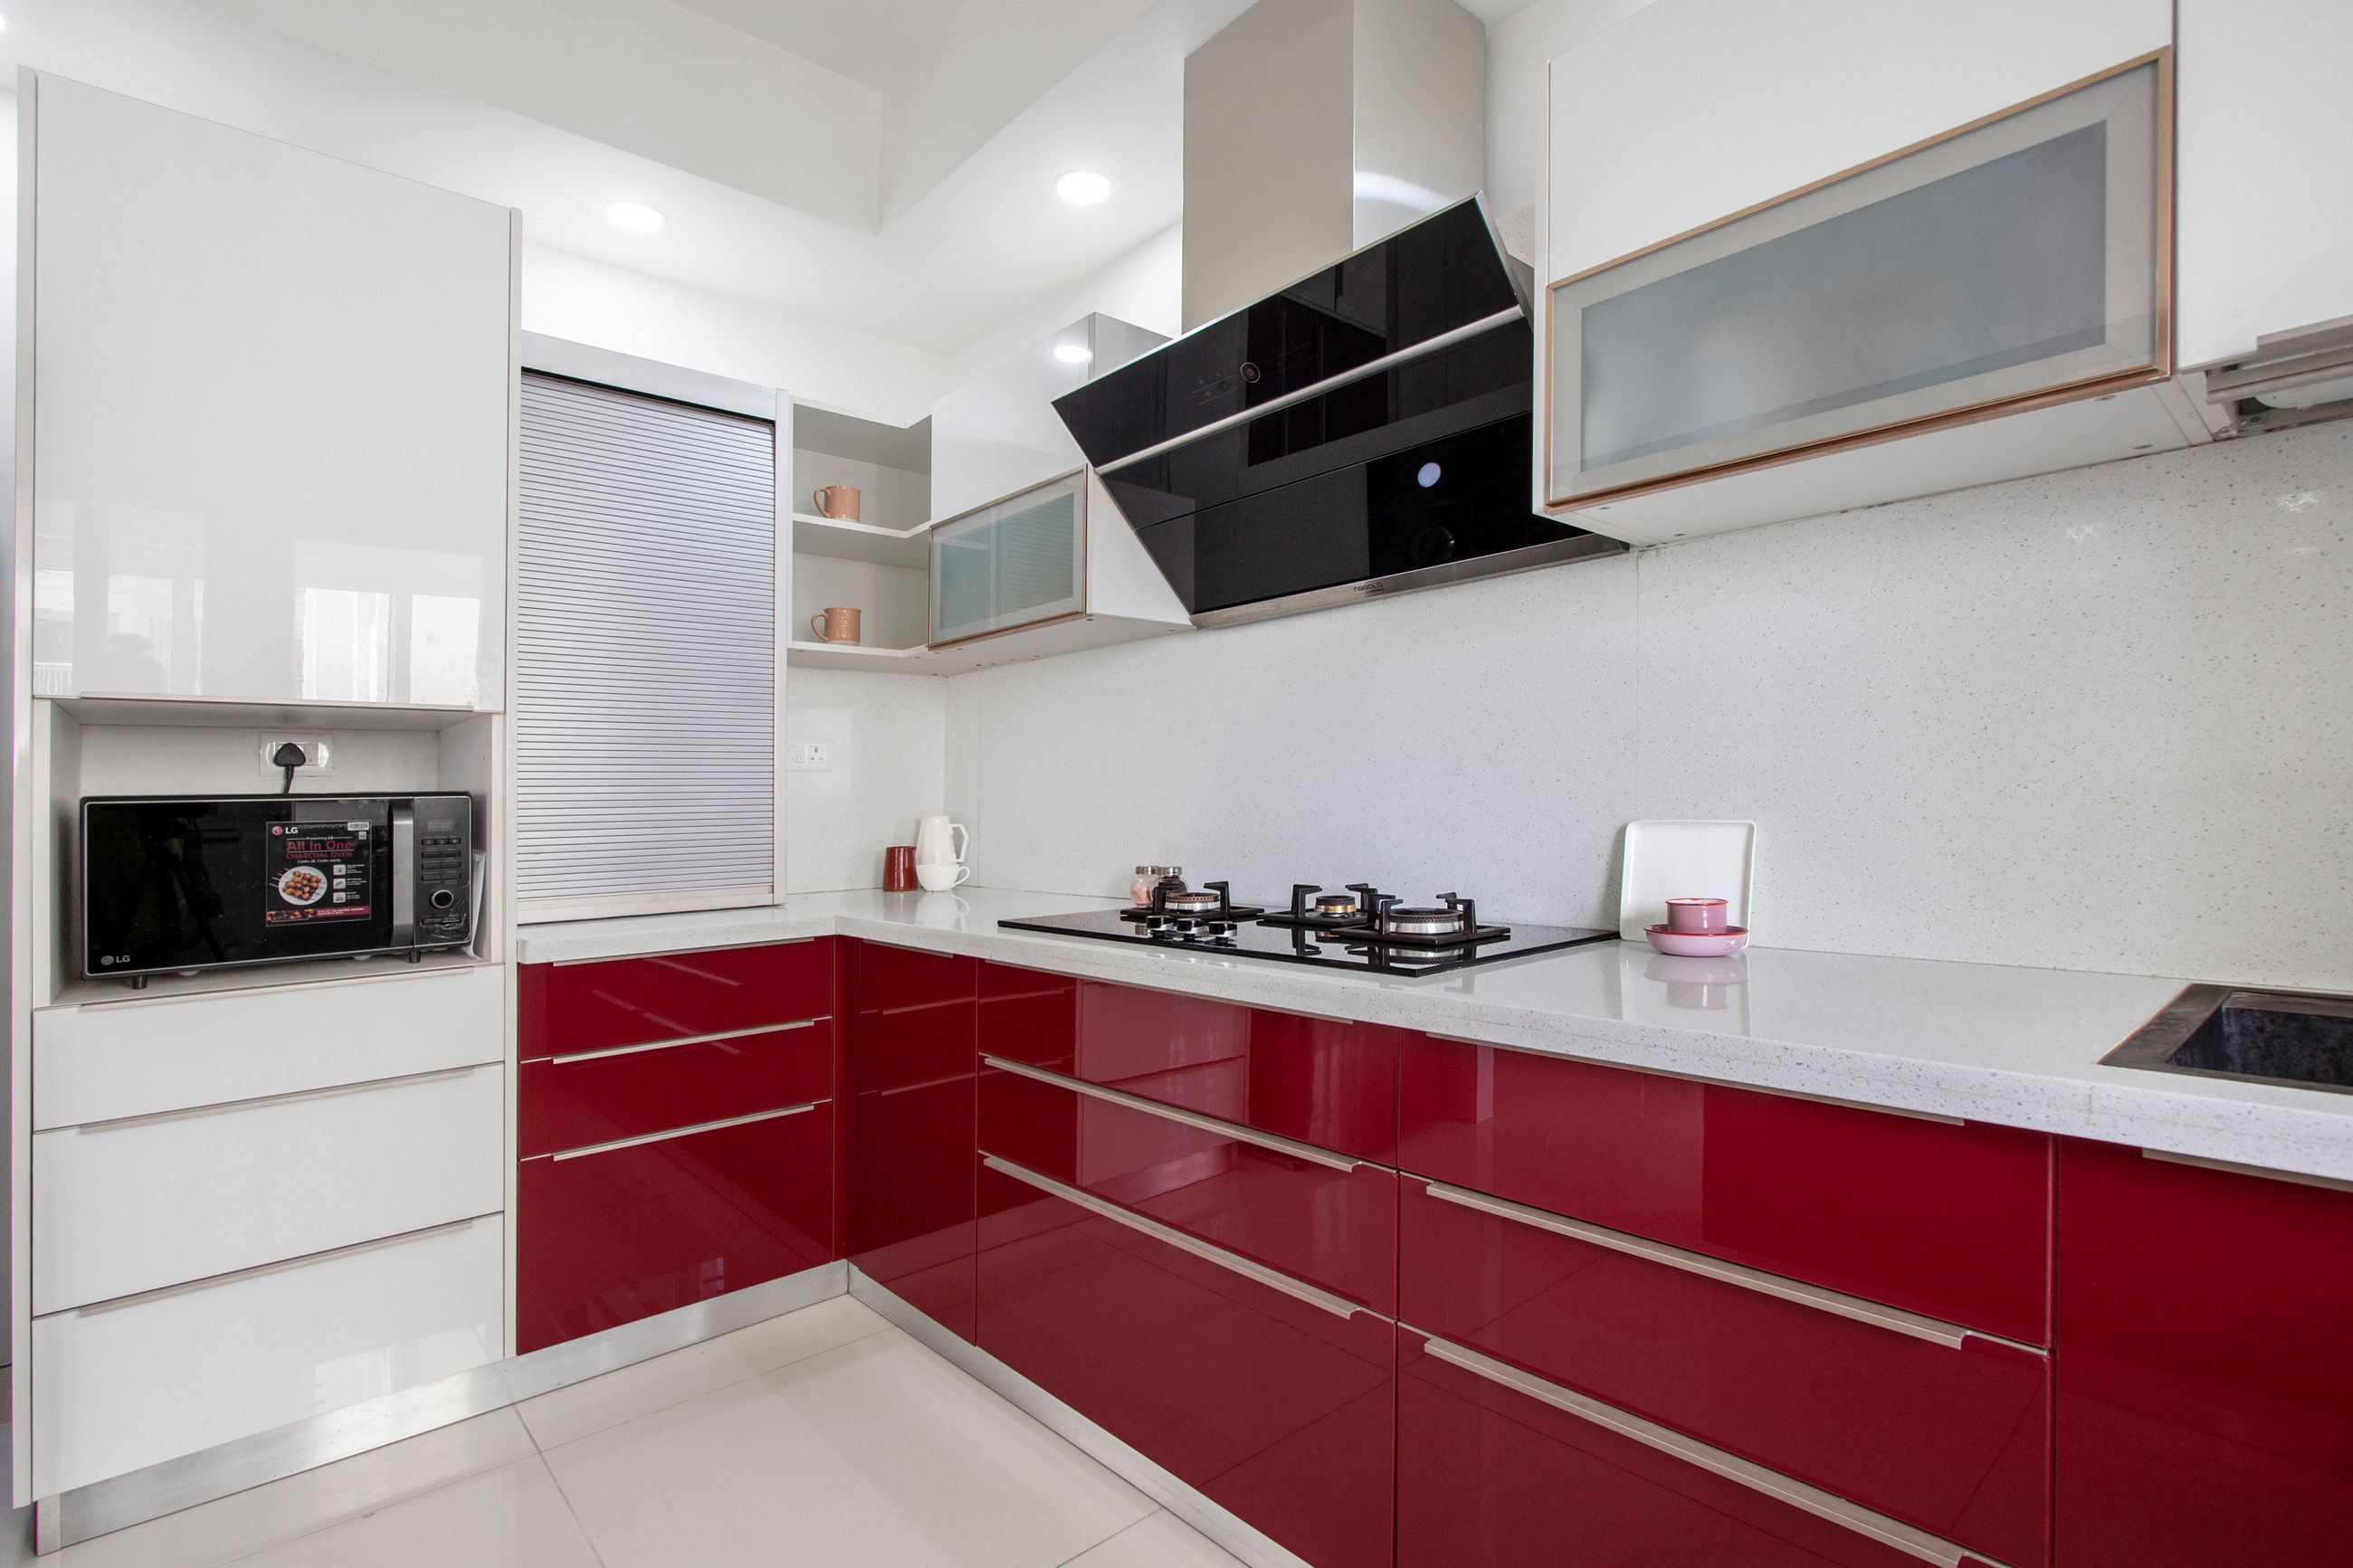 Modern Modular L-Shaped Kitchen Design With Glossy Carnival Red And Frosty White Cabinets